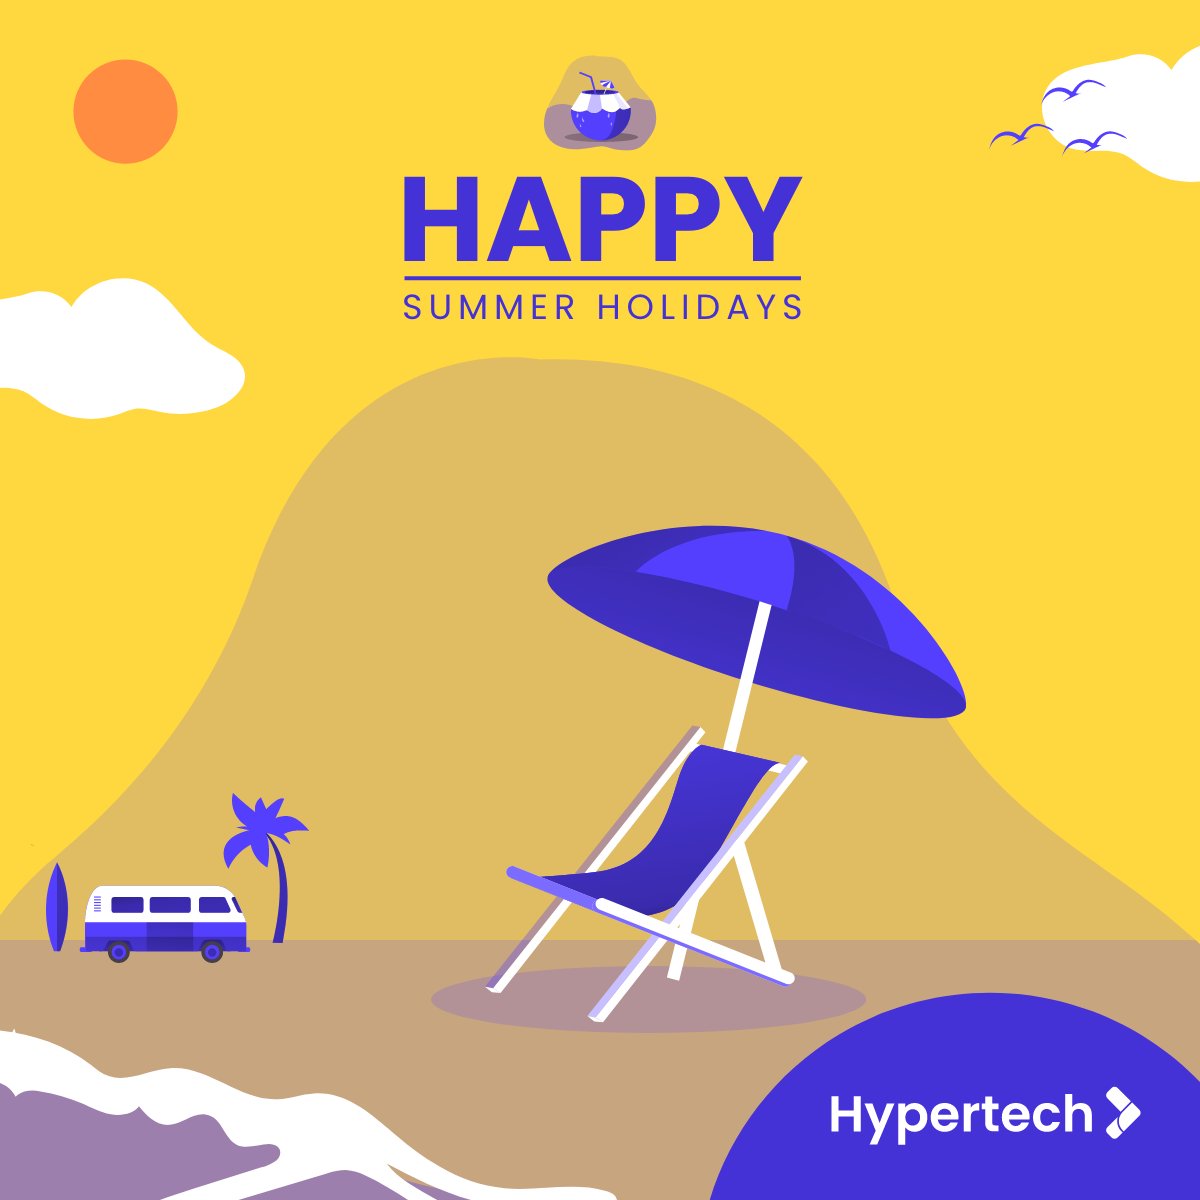 Summer is a time for relaxation, reflection, and recharging. As we are soaking up on the summer vibes, we are also gearing up for more innovations in the coming months. Wishing everyone a splendid summer!